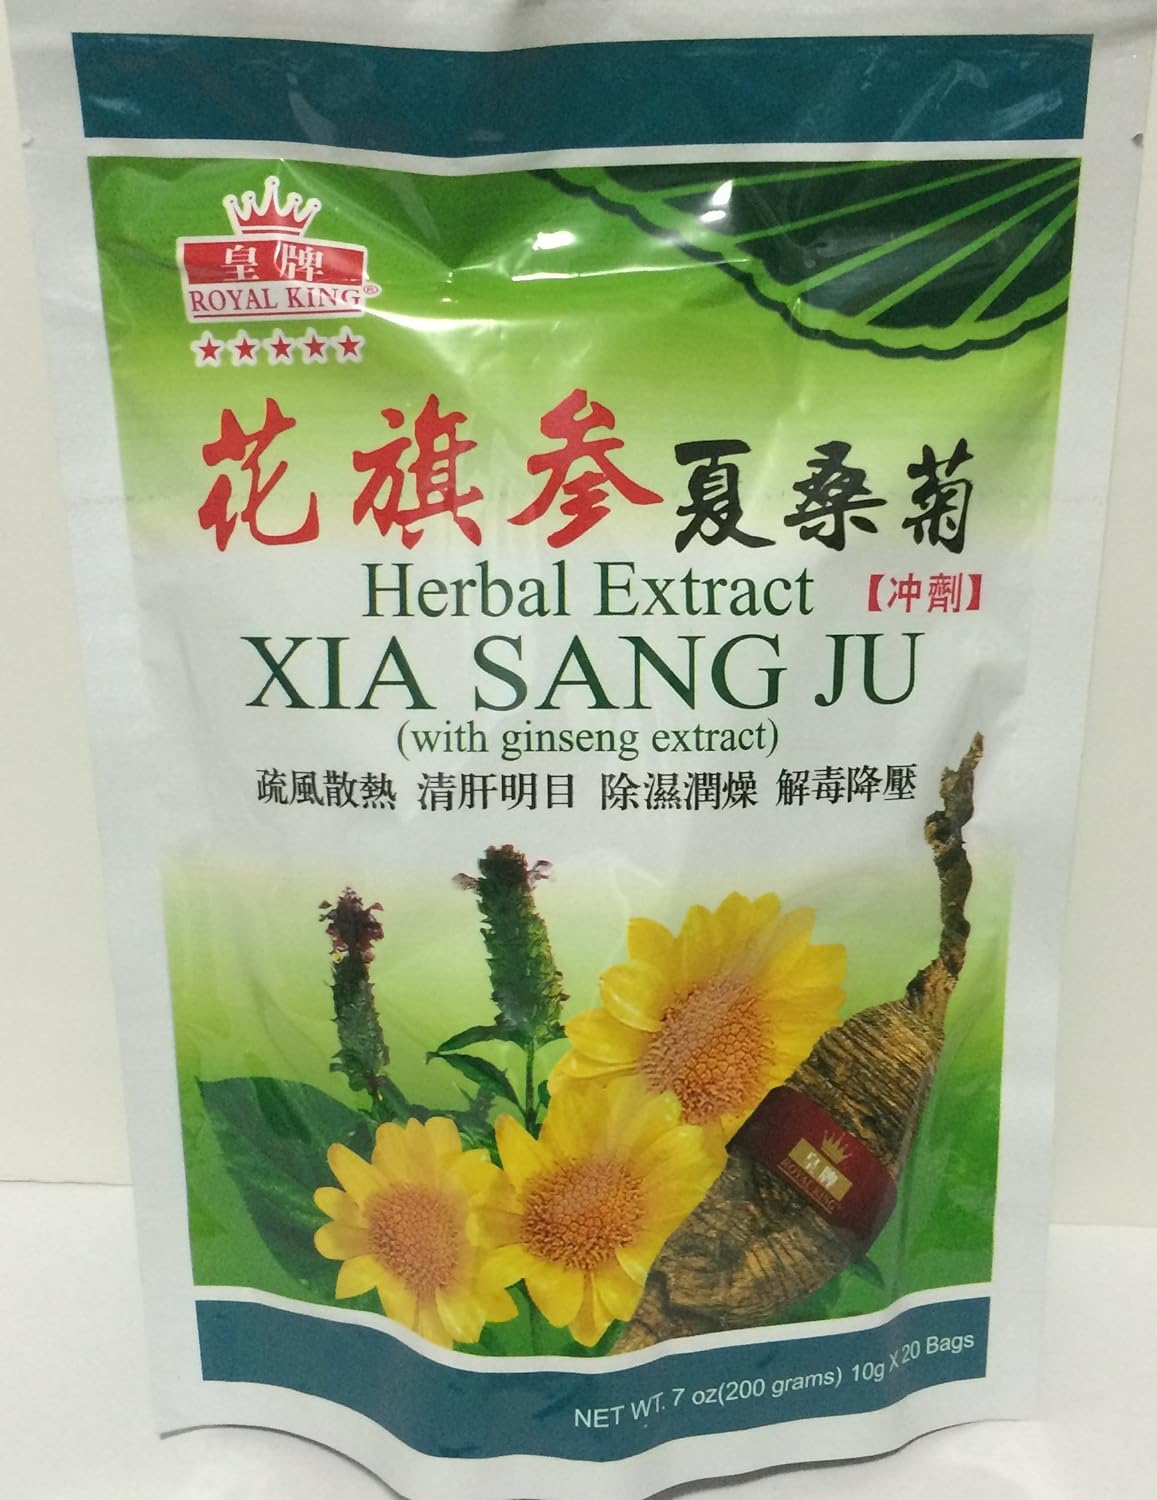 Xia Sang Ju Herbal Extract with Ginseng Extract - 10g X 20 Bags